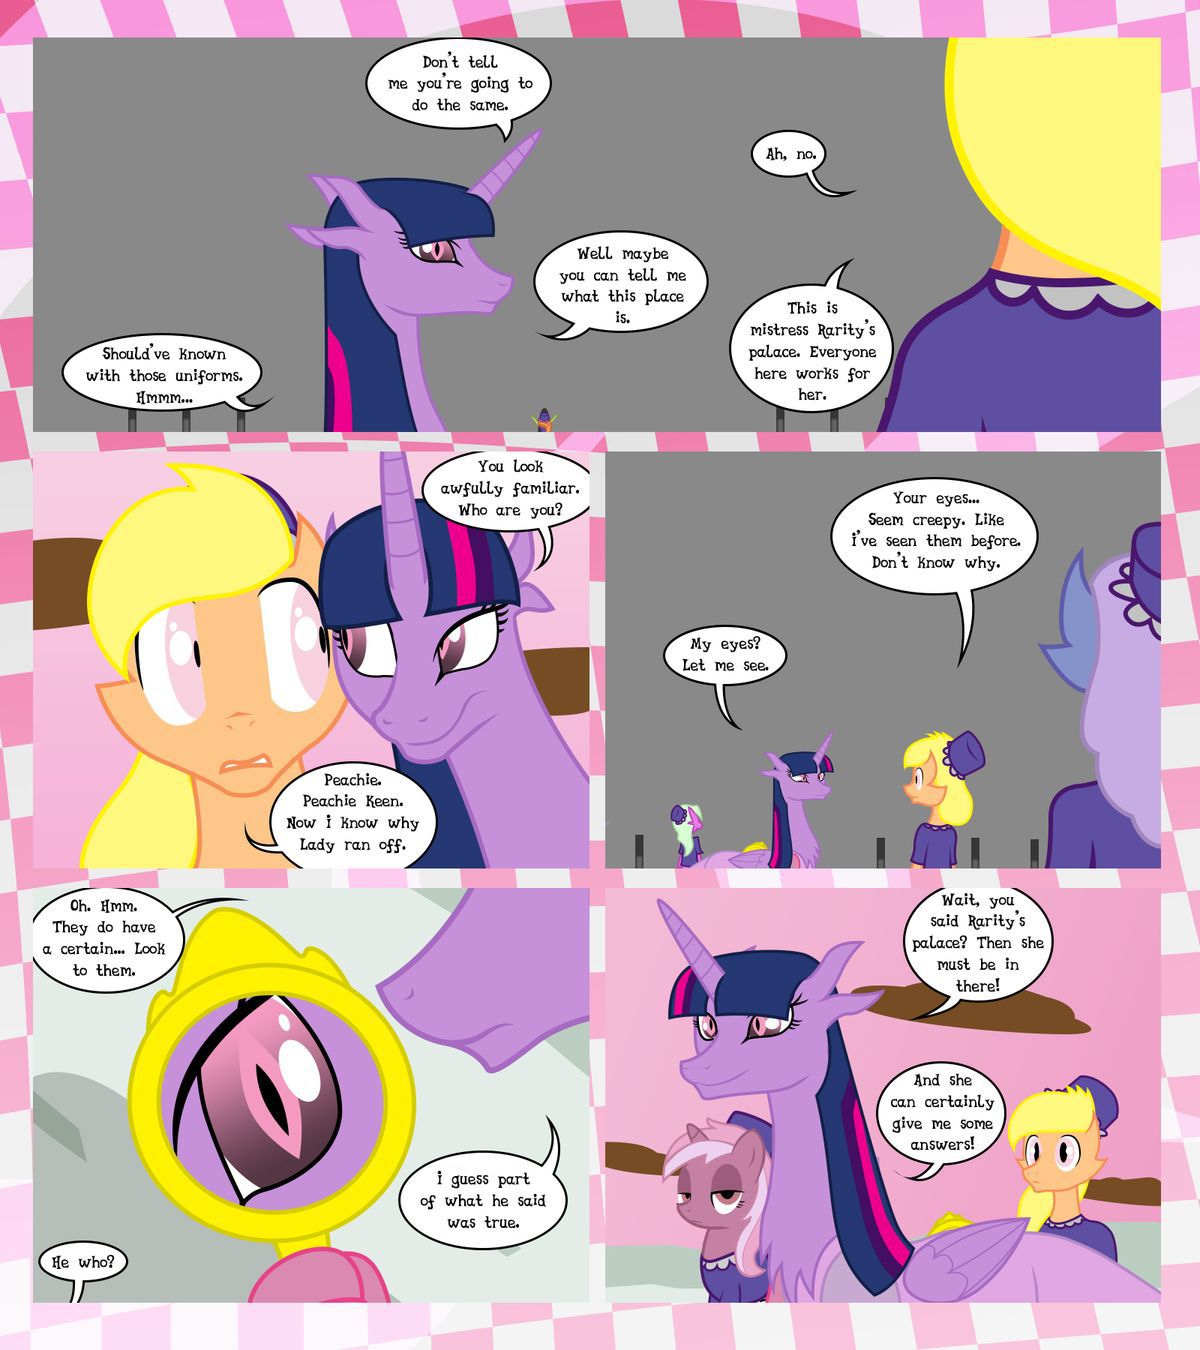 [GatesMcCloud] Cutie Mark Crusaders 10k: Chapter 3 - The Lost (My Little Pony: Friendship is Magic) [English] [Ongoing] 48